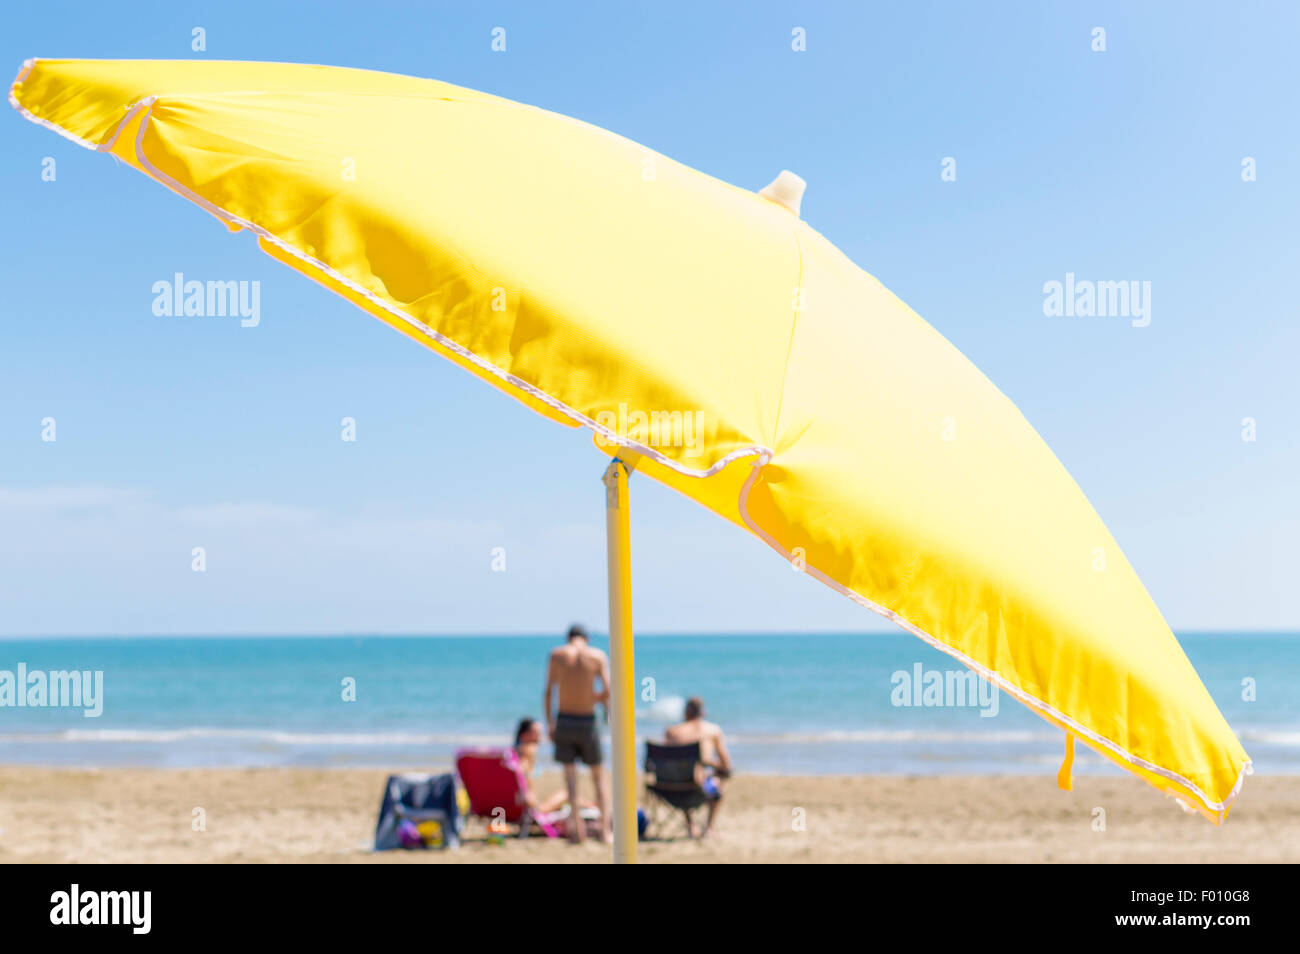 Umbrella on the beach, with the sea and sky in the background Stock Photo